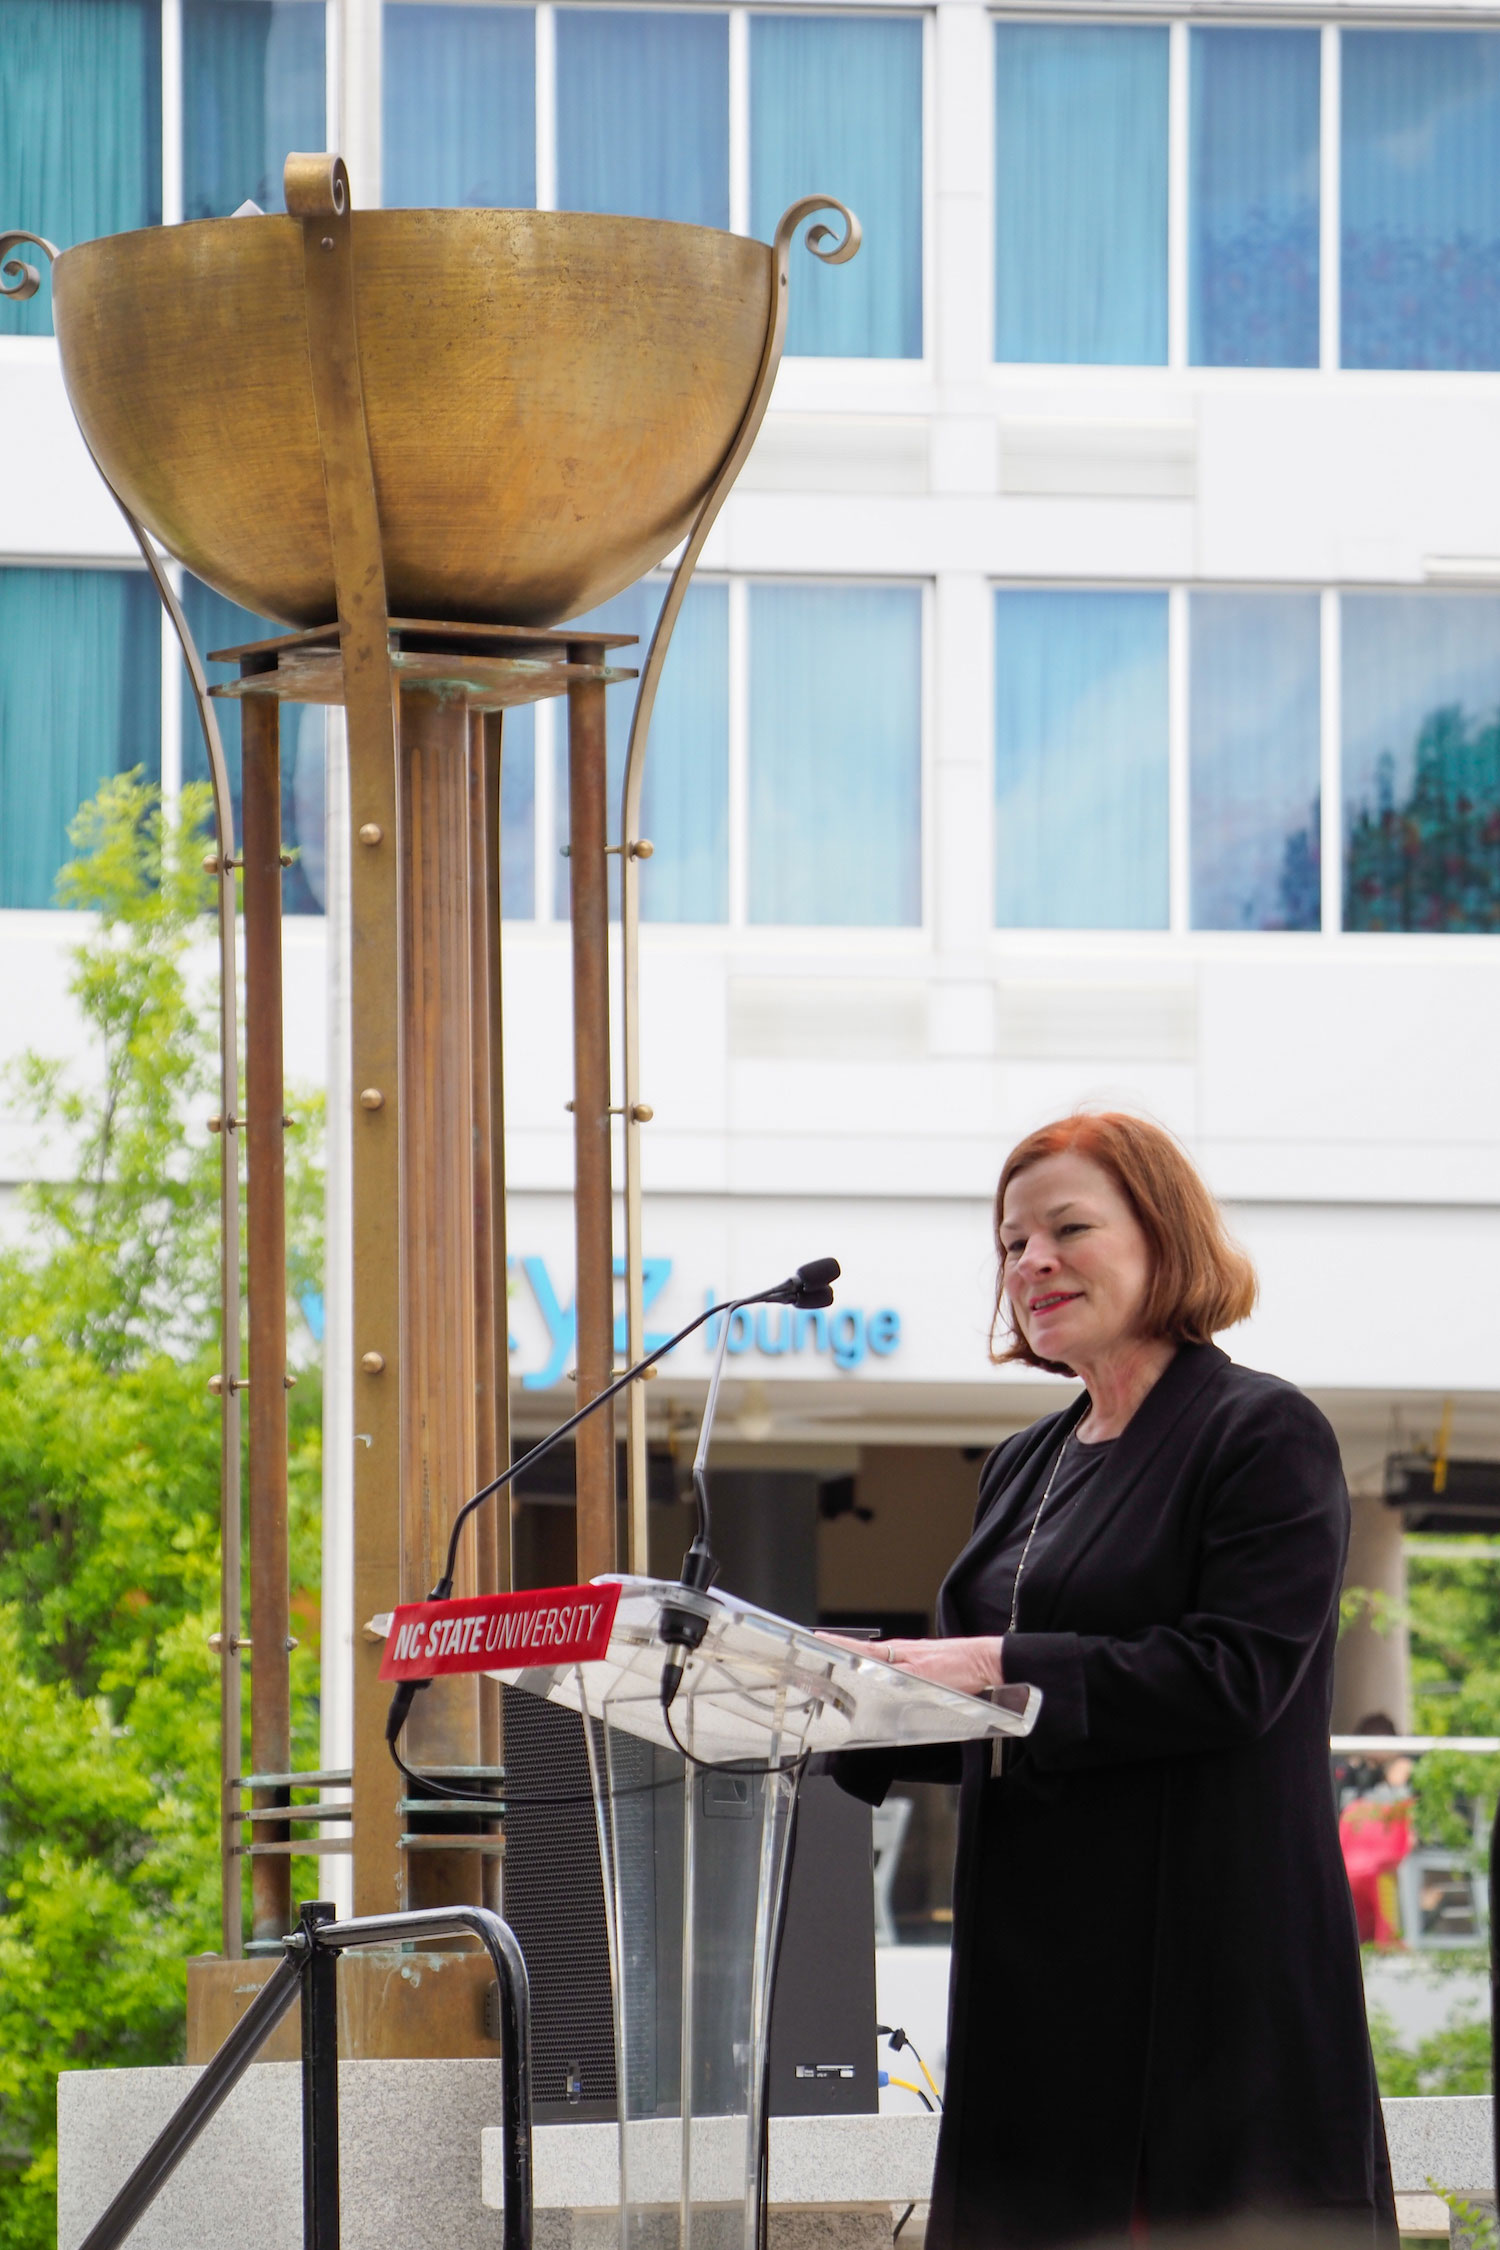 Raleigh Mayor Mary-Ann Baldwin discussing how the Memorial Belltower has been a beacon for many over the last century.